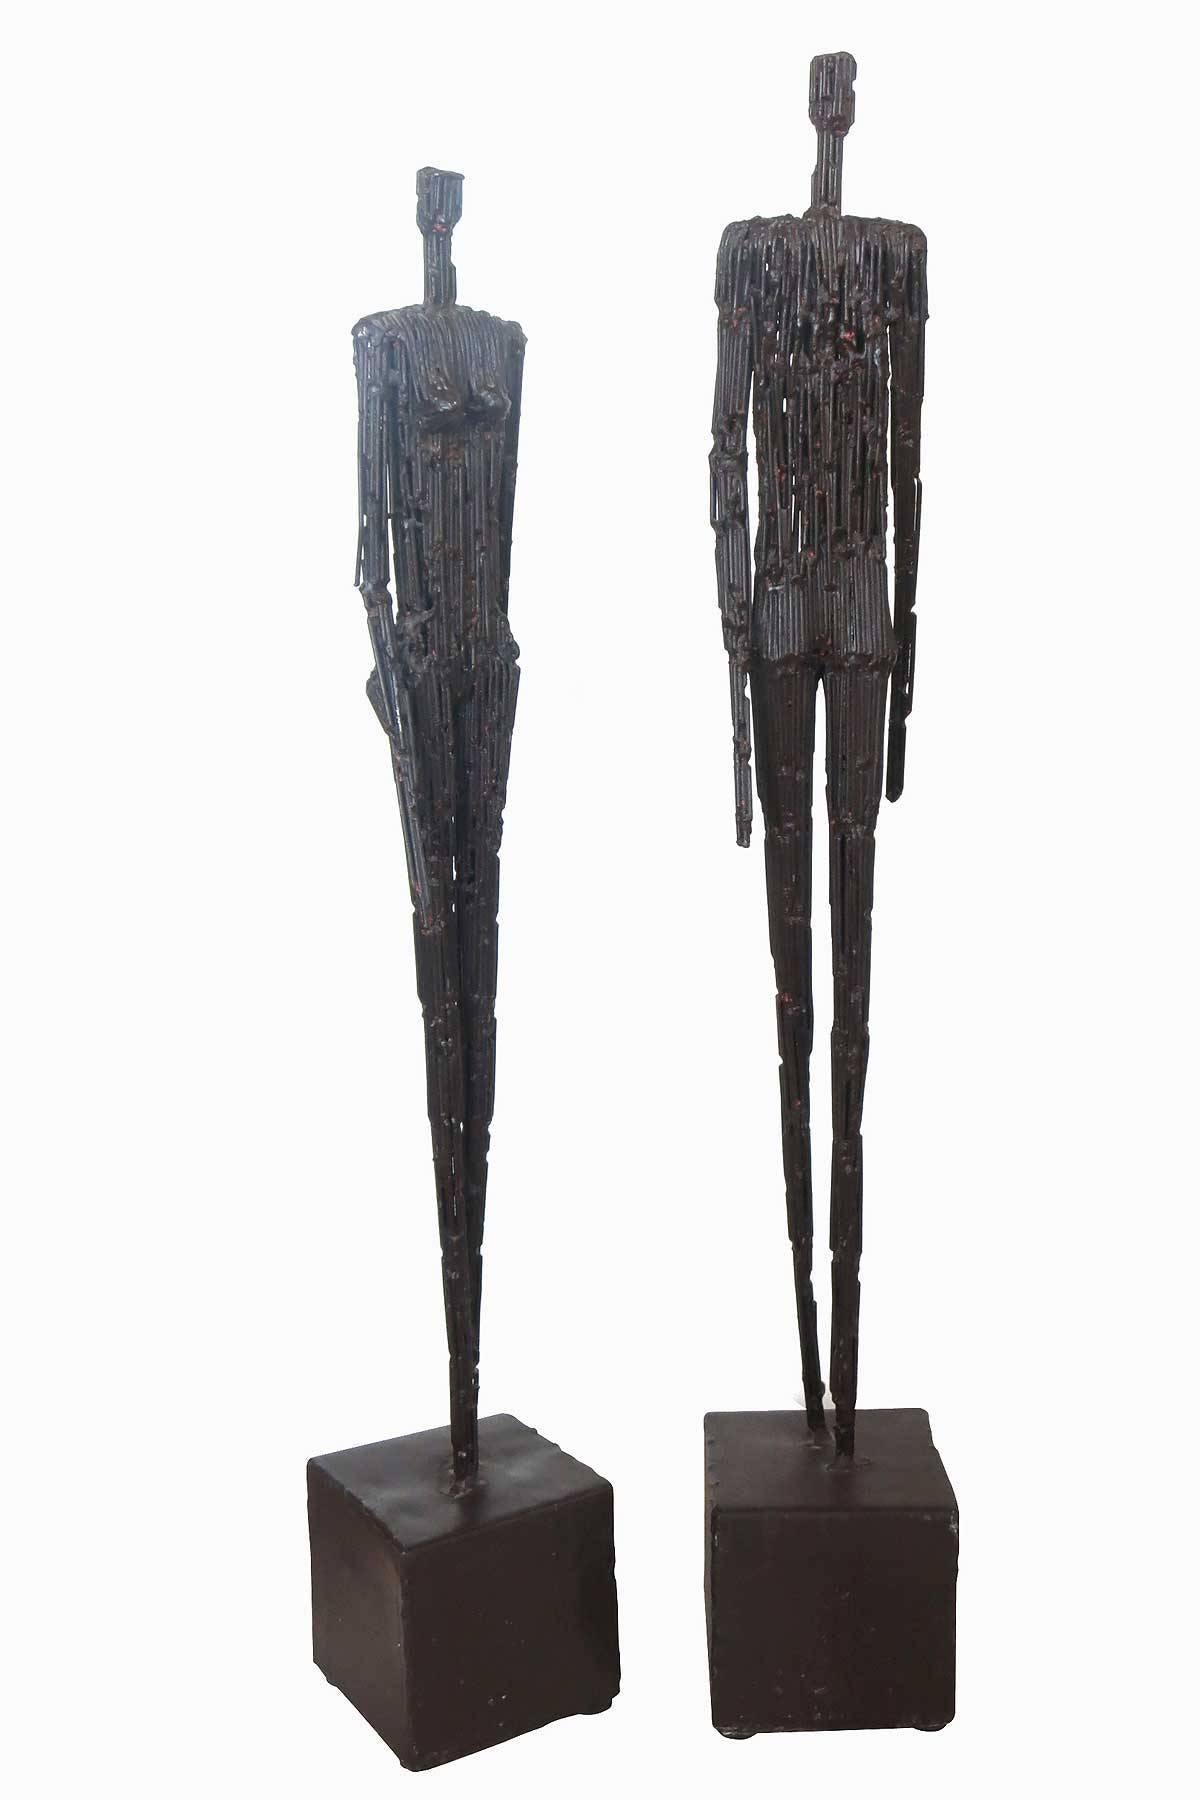 Pair of nail sculptures following the forms made famous by sculptor Alberto Giacometti.